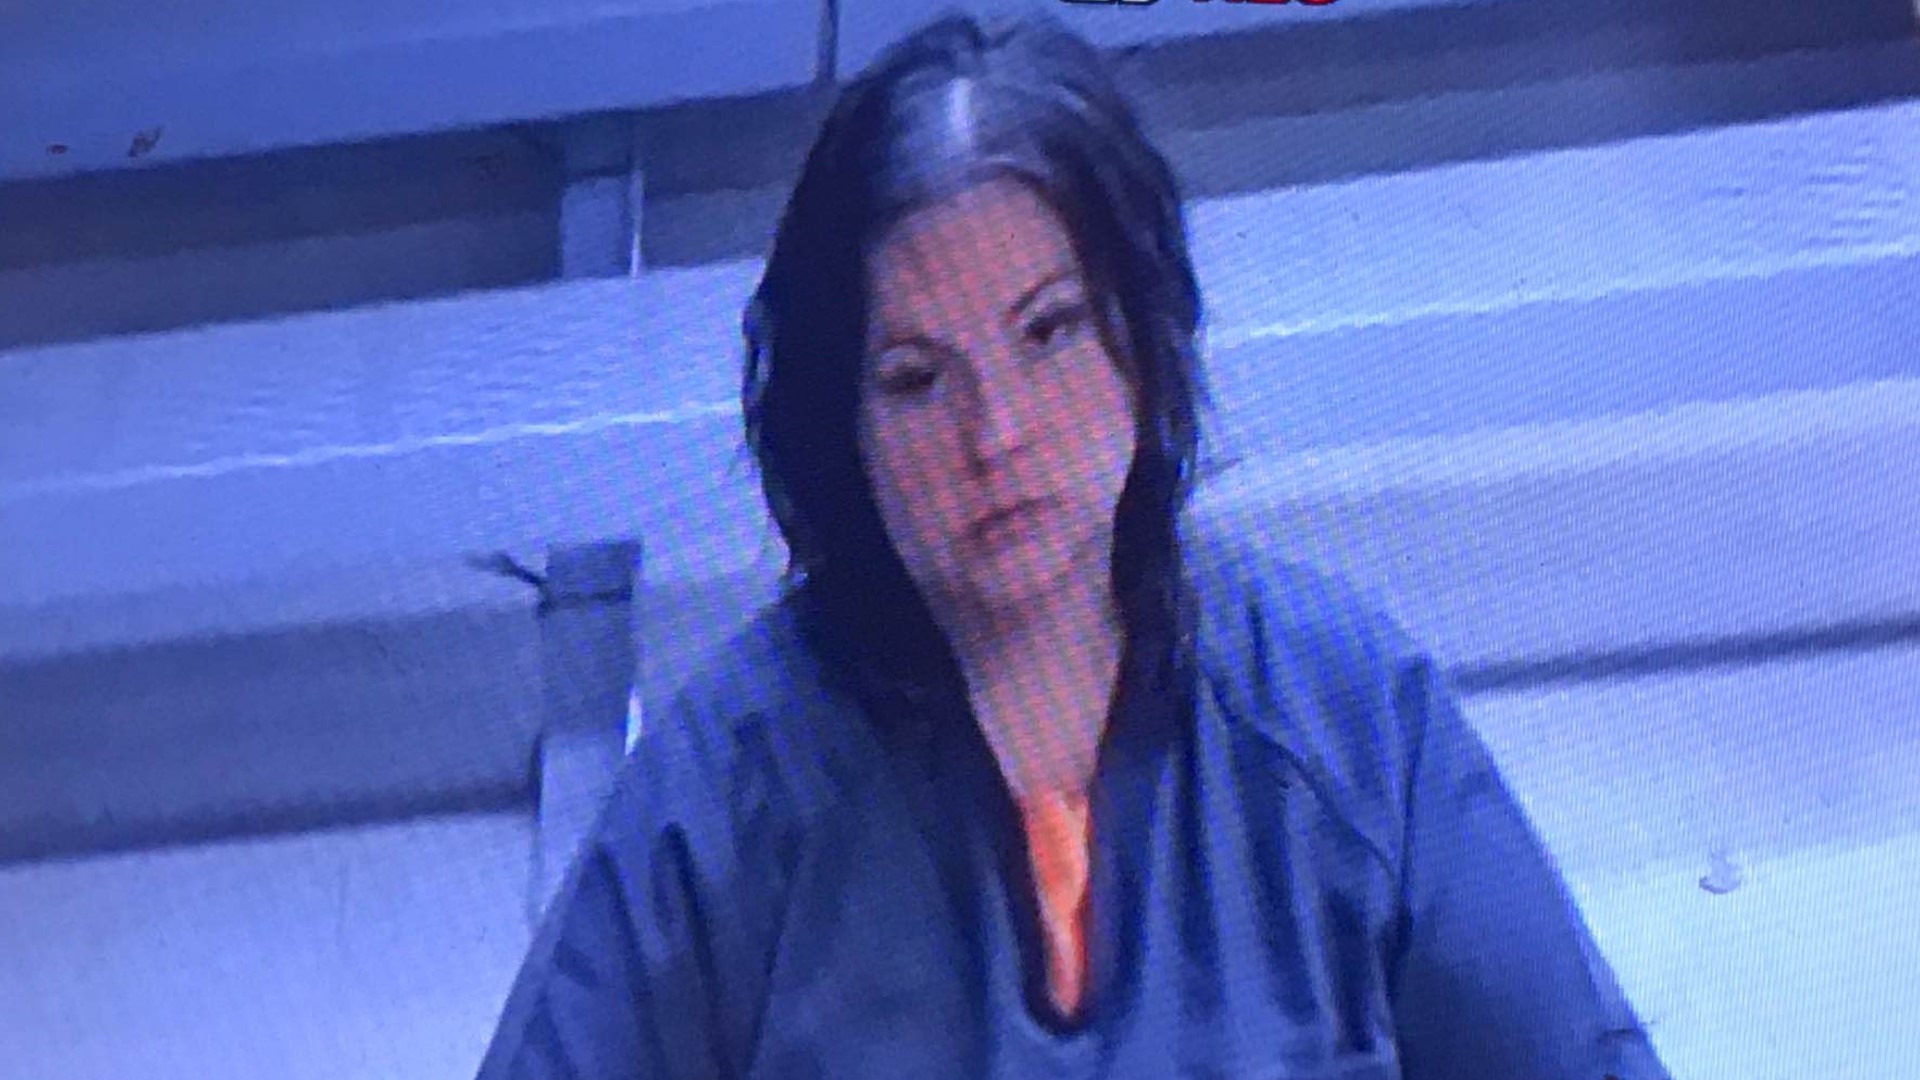 31-year-old Rose Sedin is charged with murdering 53-year-old James Clark. She made her first court appearance Tuesday and spoke with KREM 2 the same night.